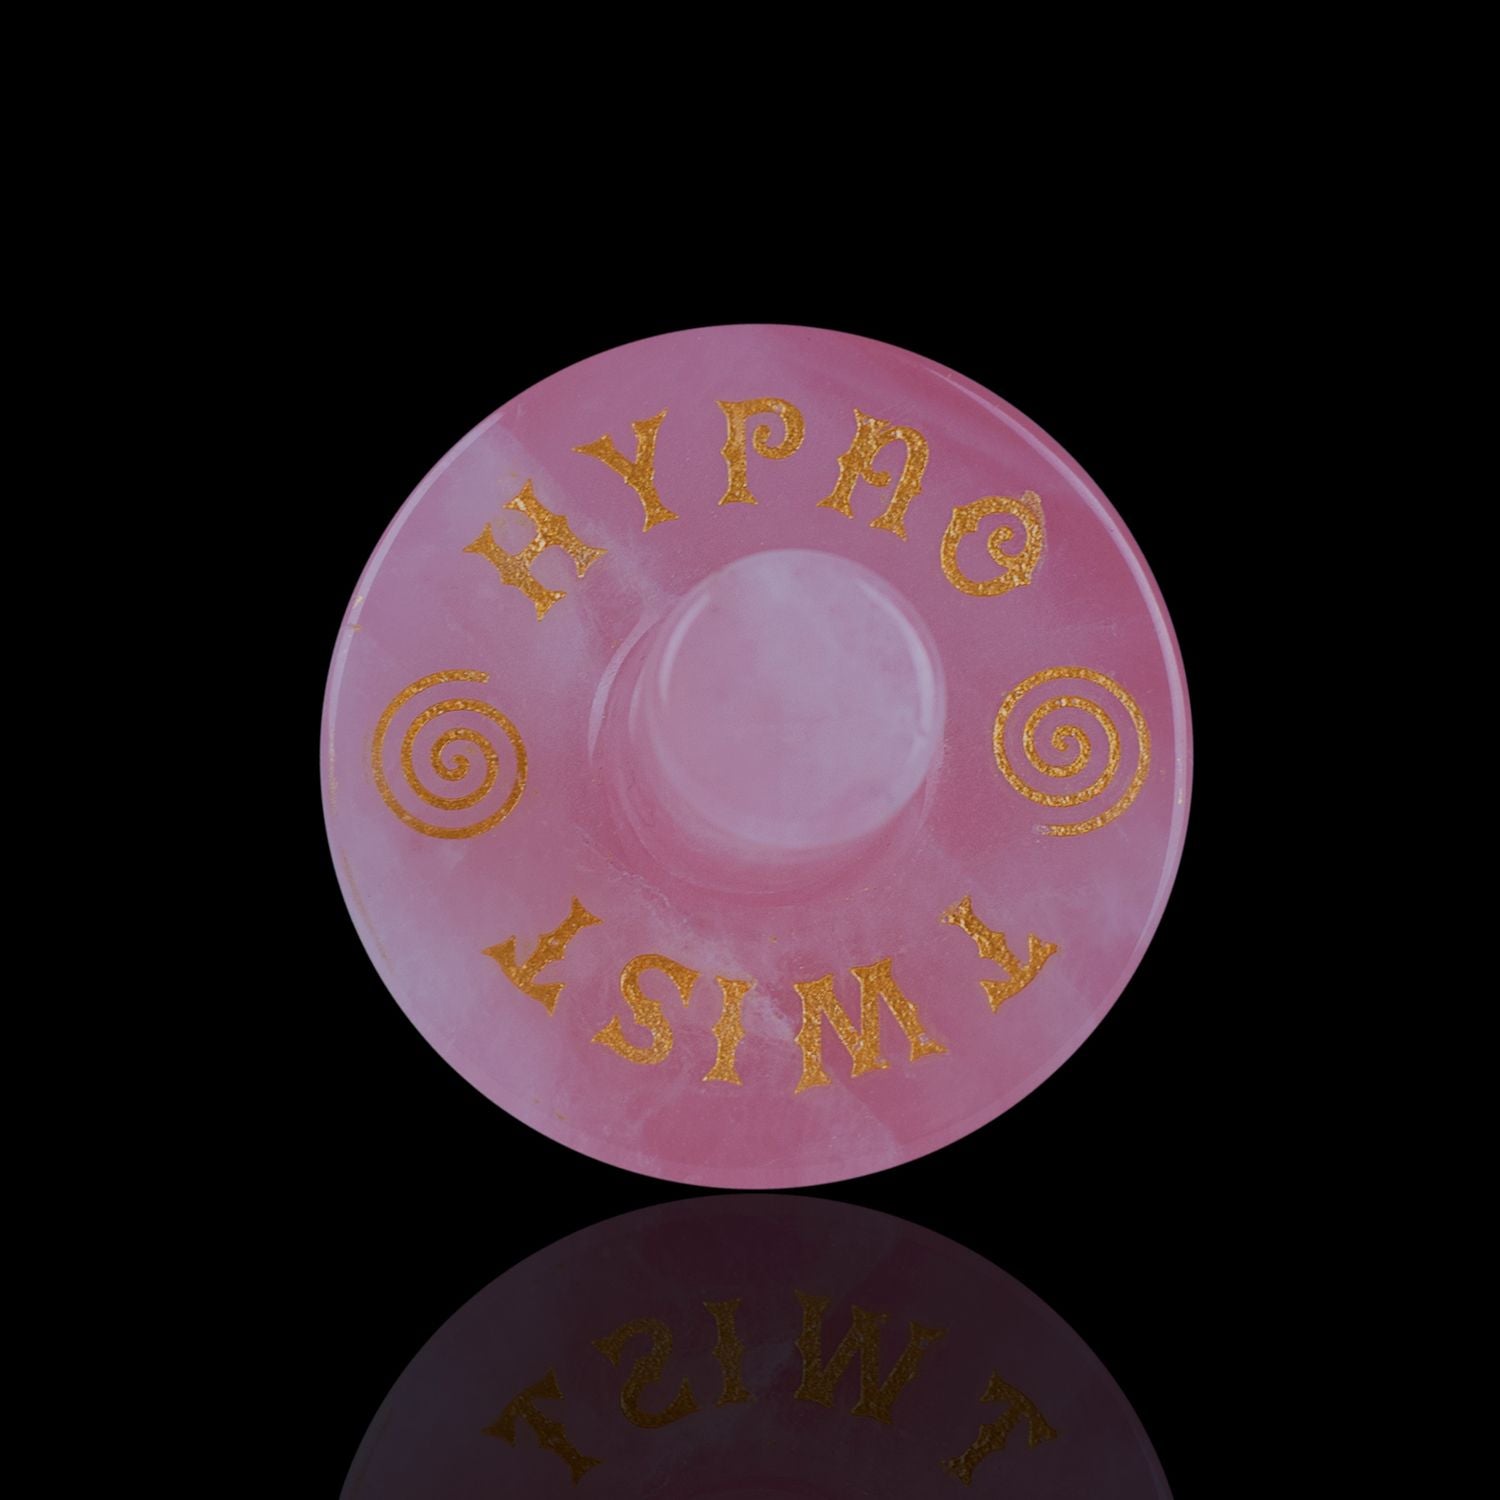 Front View Of The Naturally Wicked Exclusive Hypnotwister. A Rose Quartz Crystal Spinning Top Engraved With Hypno Twist